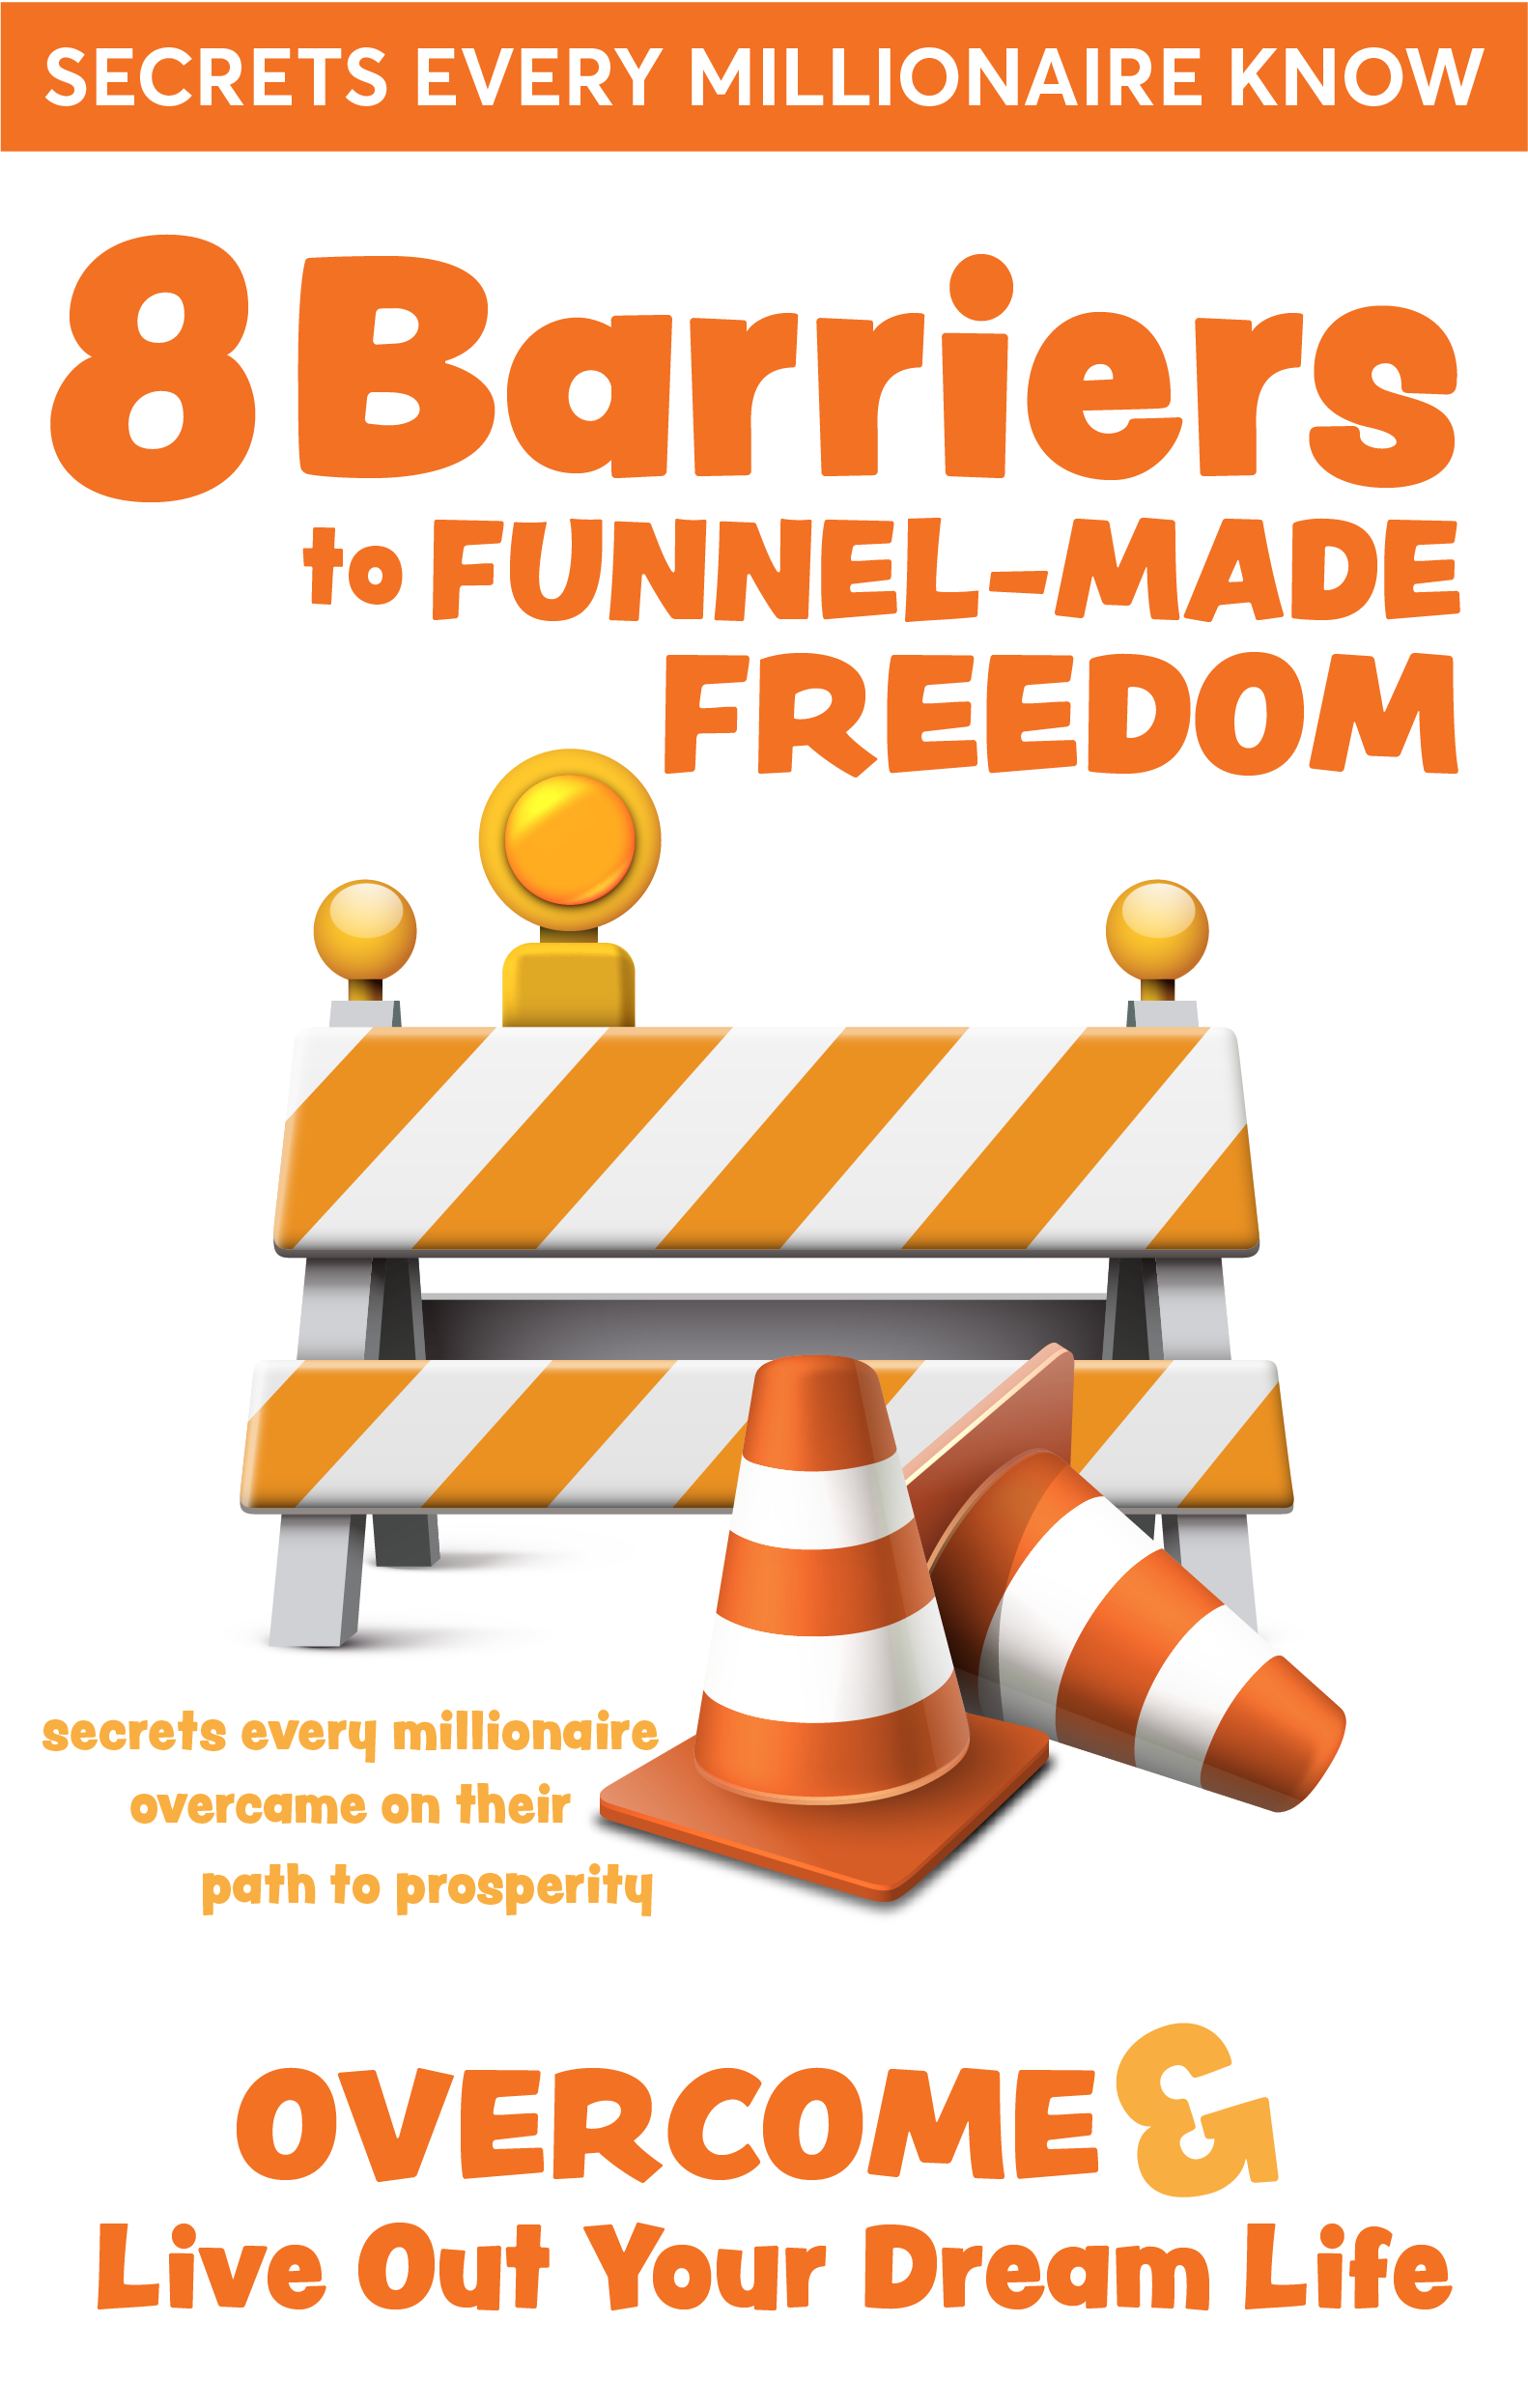 8 Barriers to Funnel-made Freedom